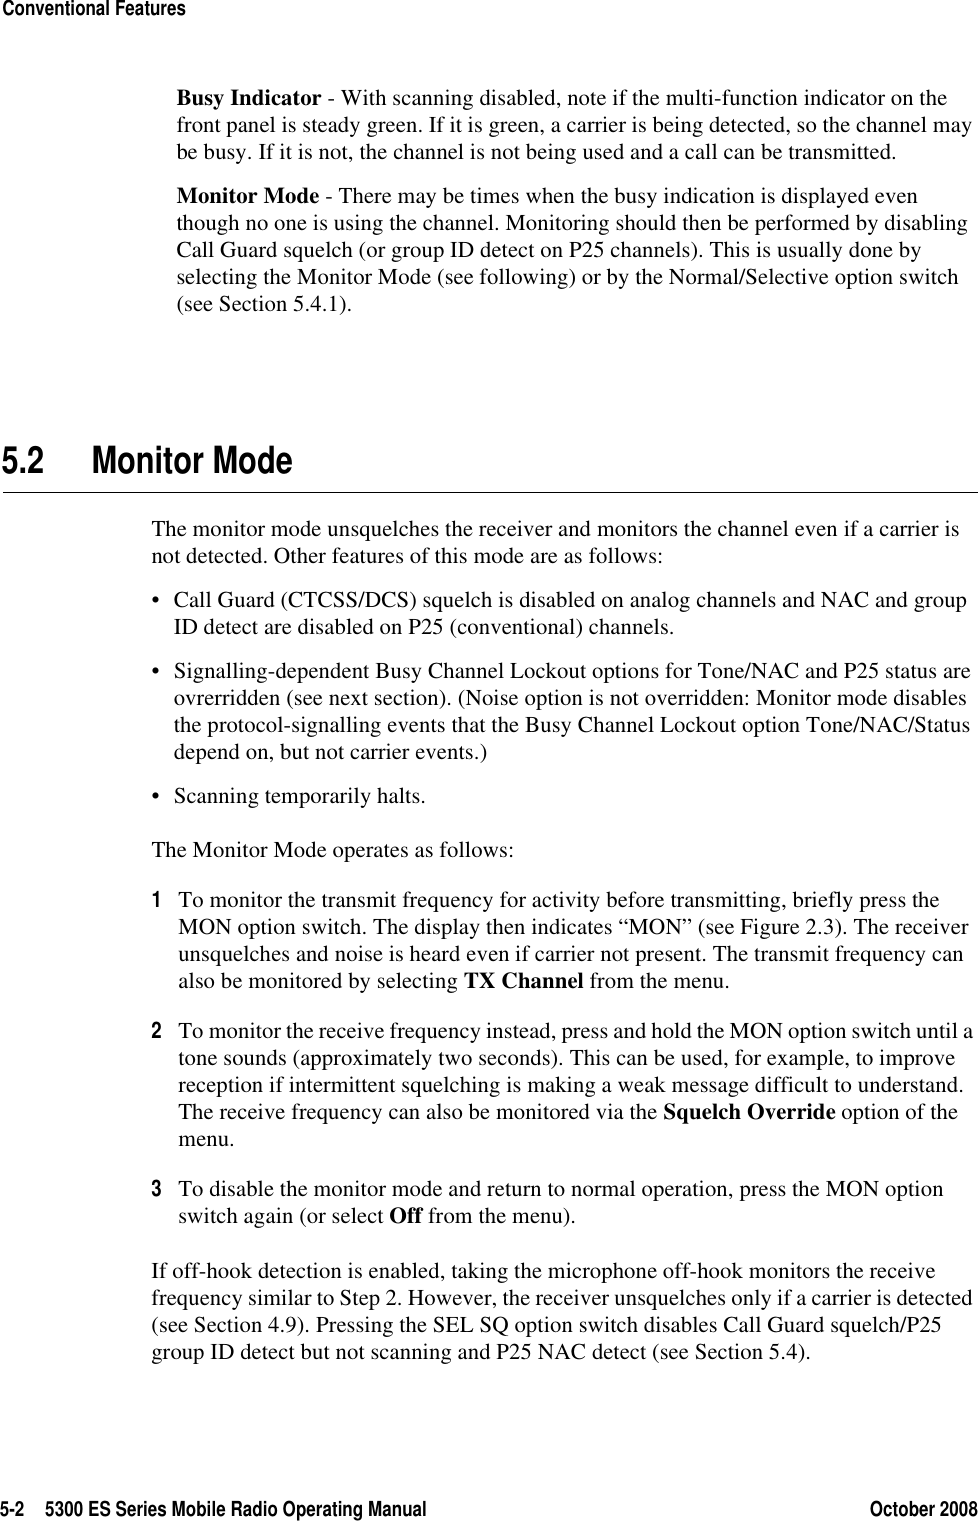 5-2 5300 ES Series Mobile Radio Operating Manual October 2008Conventional FeaturesBusy Indicator - With scanning disabled, note if the multi-function indicator on the front panel is steady green. If it is green, a carrier is being detected, so the channel may be busy. If it is not, the channel is not being used and a call can be transmitted.Monitor Mode - There may be times when the busy indication is displayed even though no one is using the channel. Monitoring should then be performed by disabling Call Guard squelch (or group ID detect on P25 channels). This is usually done by selecting the Monitor Mode (see following) or by the Normal/Selective option switch (see Section 5.4.1).5.2 Monitor ModeThe monitor mode unsquelches the receiver and monitors the channel even if a carrier is not detected. Other features of this mode are as follows:• Call Guard (CTCSS/DCS) squelch is disabled on analog channels and NAC and group ID detect are disabled on P25 (conventional) channels.• Signalling-dependent Busy Channel Lockout options for Tone/NAC and P25 status are ovrerridden (see next section). (Noise option is not overridden: Monitor mode disables the protocol-signalling events that the Busy Channel Lockout option Tone/NAC/Status depend on, but not carrier events.)• Scanning temporarily halts.The Monitor Mode operates as follows:1To monitor the transmit frequency for activity before transmitting, briefly press the MON option switch. The display then indicates “MON” (see Figure 2.3). The receiver unsquelches and noise is heard even if carrier not present. The transmit frequency can also be monitored by selecting TX Channel from the menu.2To monitor the receive frequency instead, press and hold the MON option switch until a tone sounds (approximately two seconds). This can be used, for example, to improve reception if intermittent squelching is making a weak message difficult to understand. The receive frequency can also be monitored via the Squelch Override option of the menu.3To disable the monitor mode and return to normal operation, press the MON option switch again (or select Off from the menu).If off-hook detection is enabled, taking the microphone off-hook monitors the receive frequency similar to Step 2. However, the receiver unsquelches only if a carrier is detected (see Section 4.9). Pressing the SEL SQ option switch disables Call Guard squelch/P25 group ID detect but not scanning and P25 NAC detect (see Section 5.4).